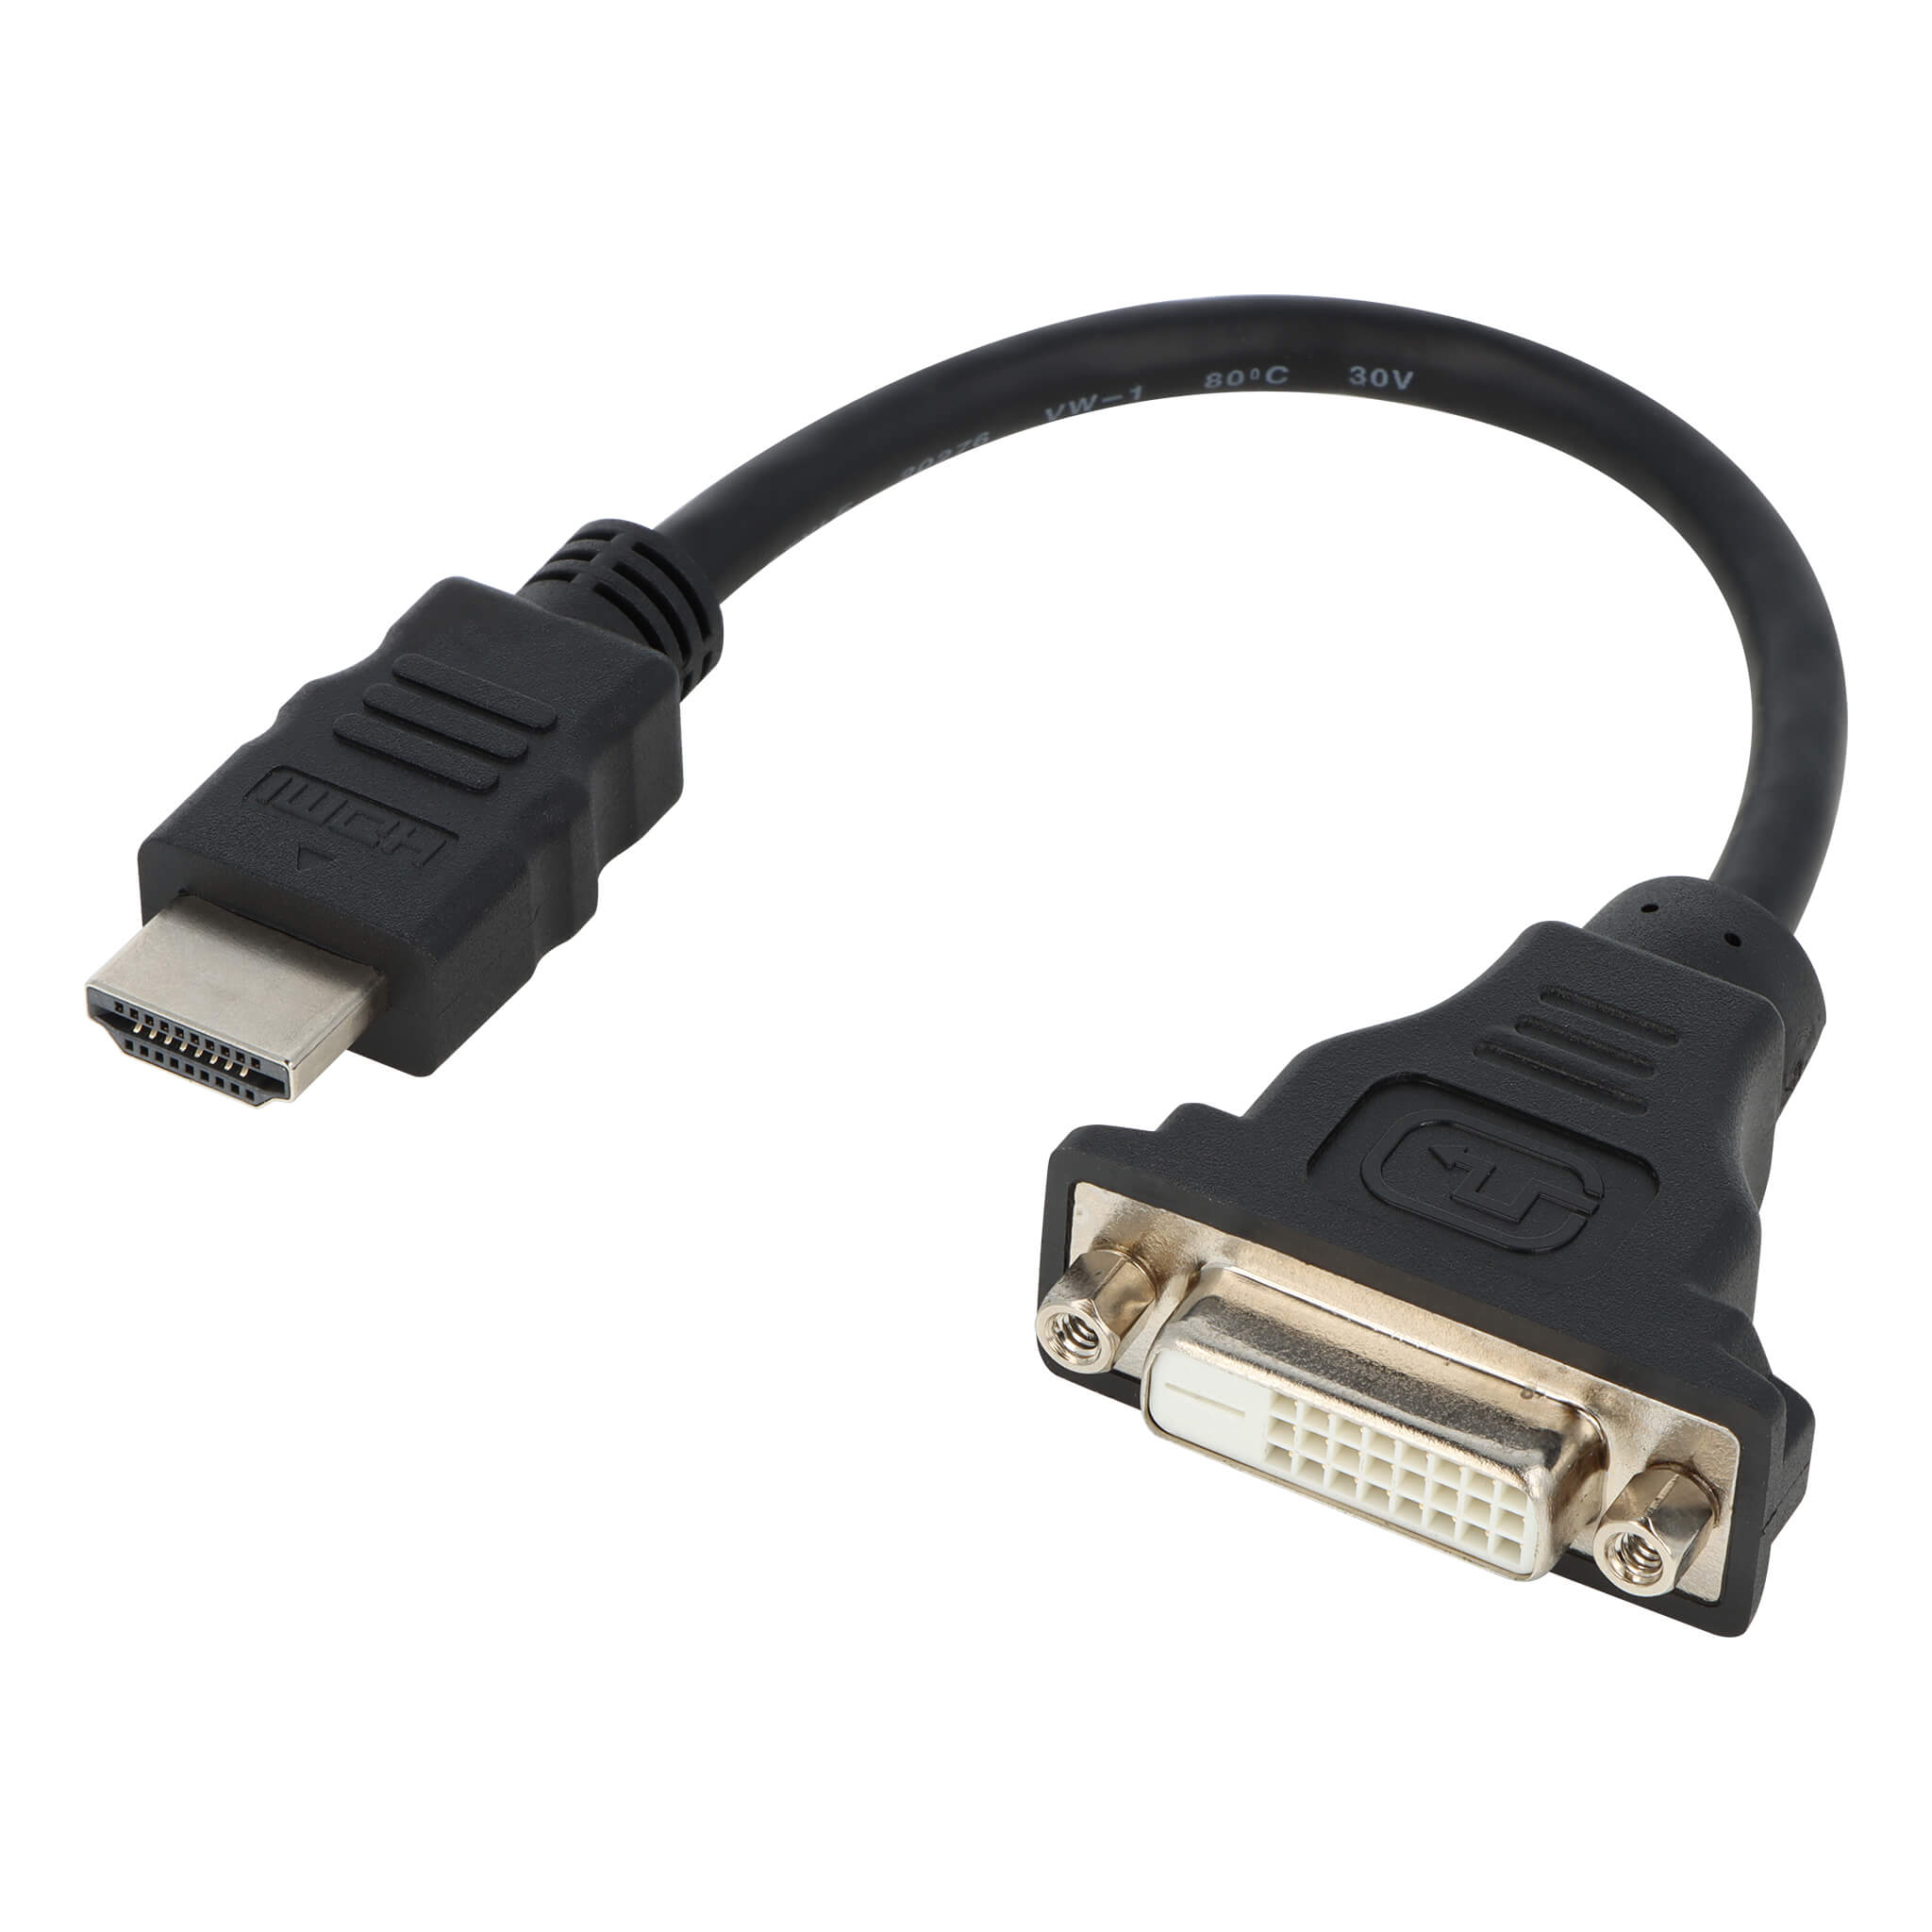 HDMI to DVI-D Video Cable Adapter - F/M